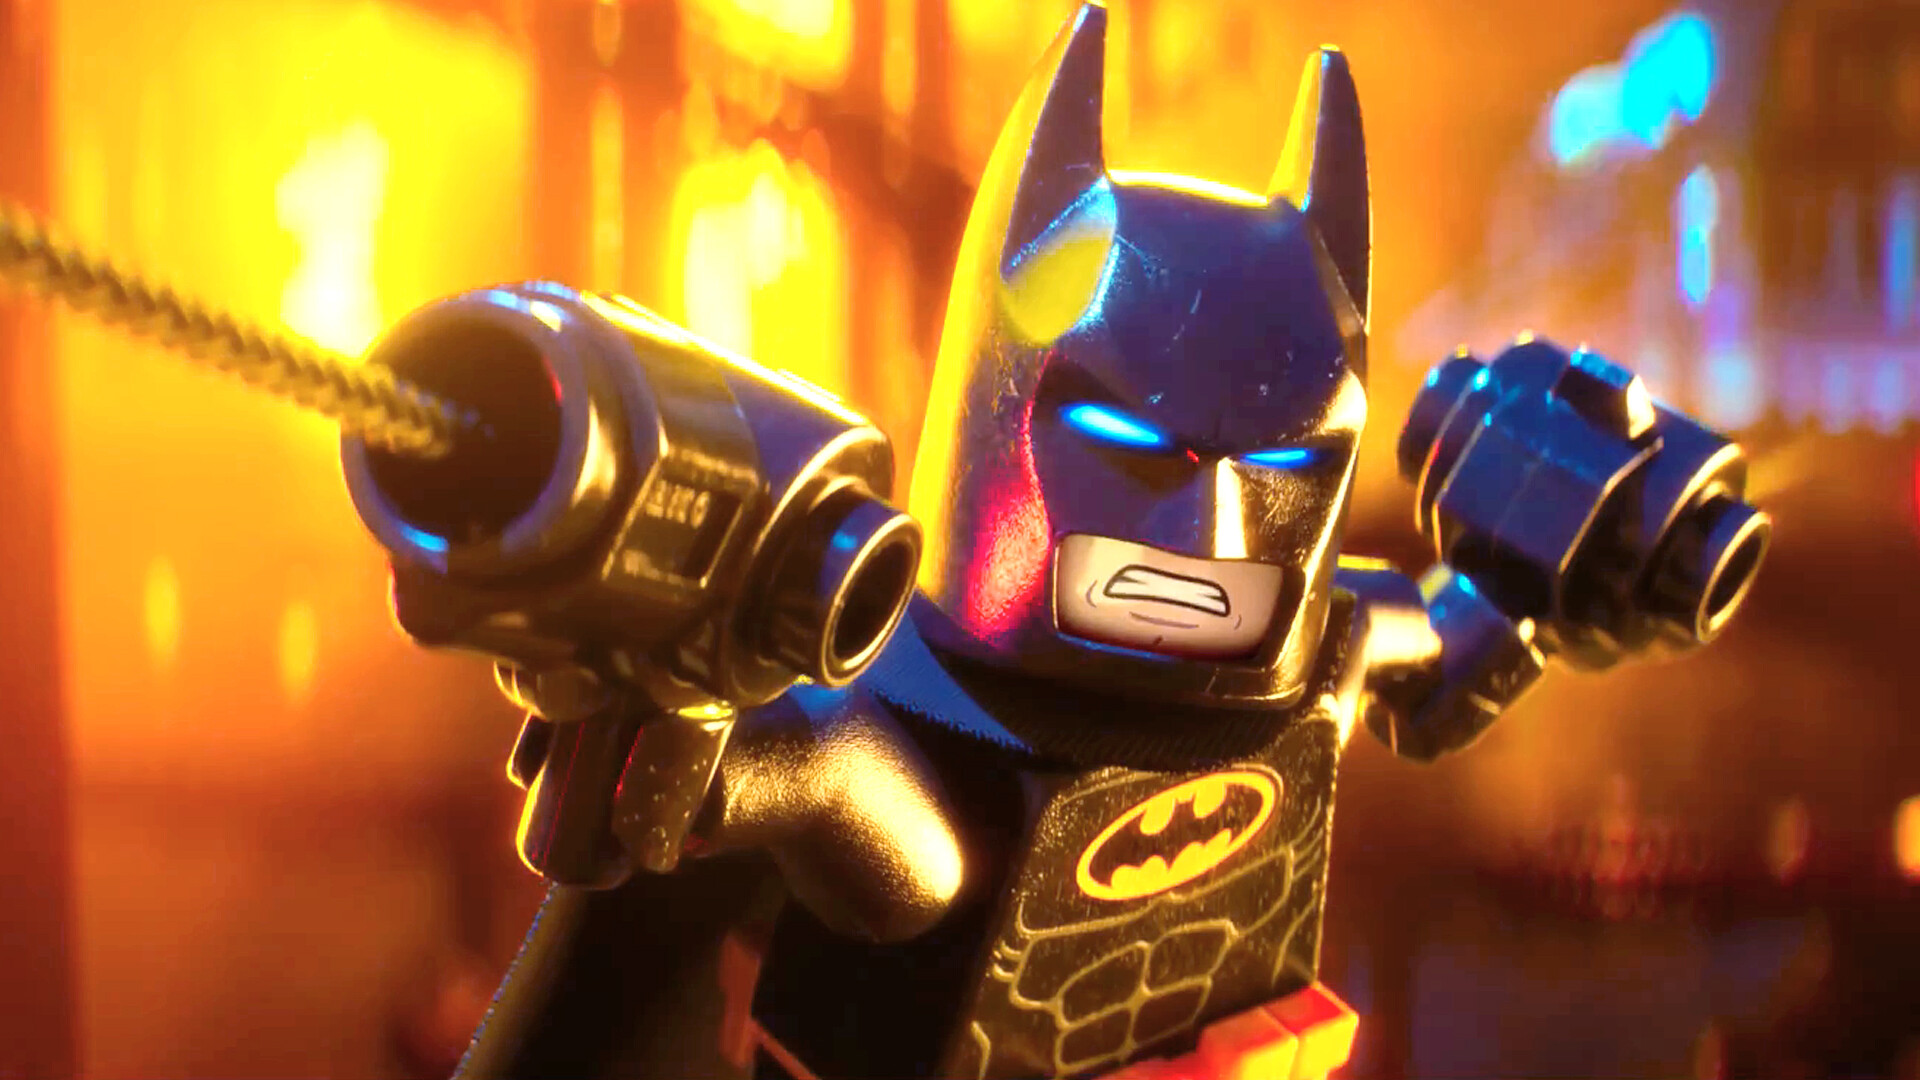 The Lego Movie: The film features Will Arnett reprising his role as Batman. 1920x1080 Full HD Background.